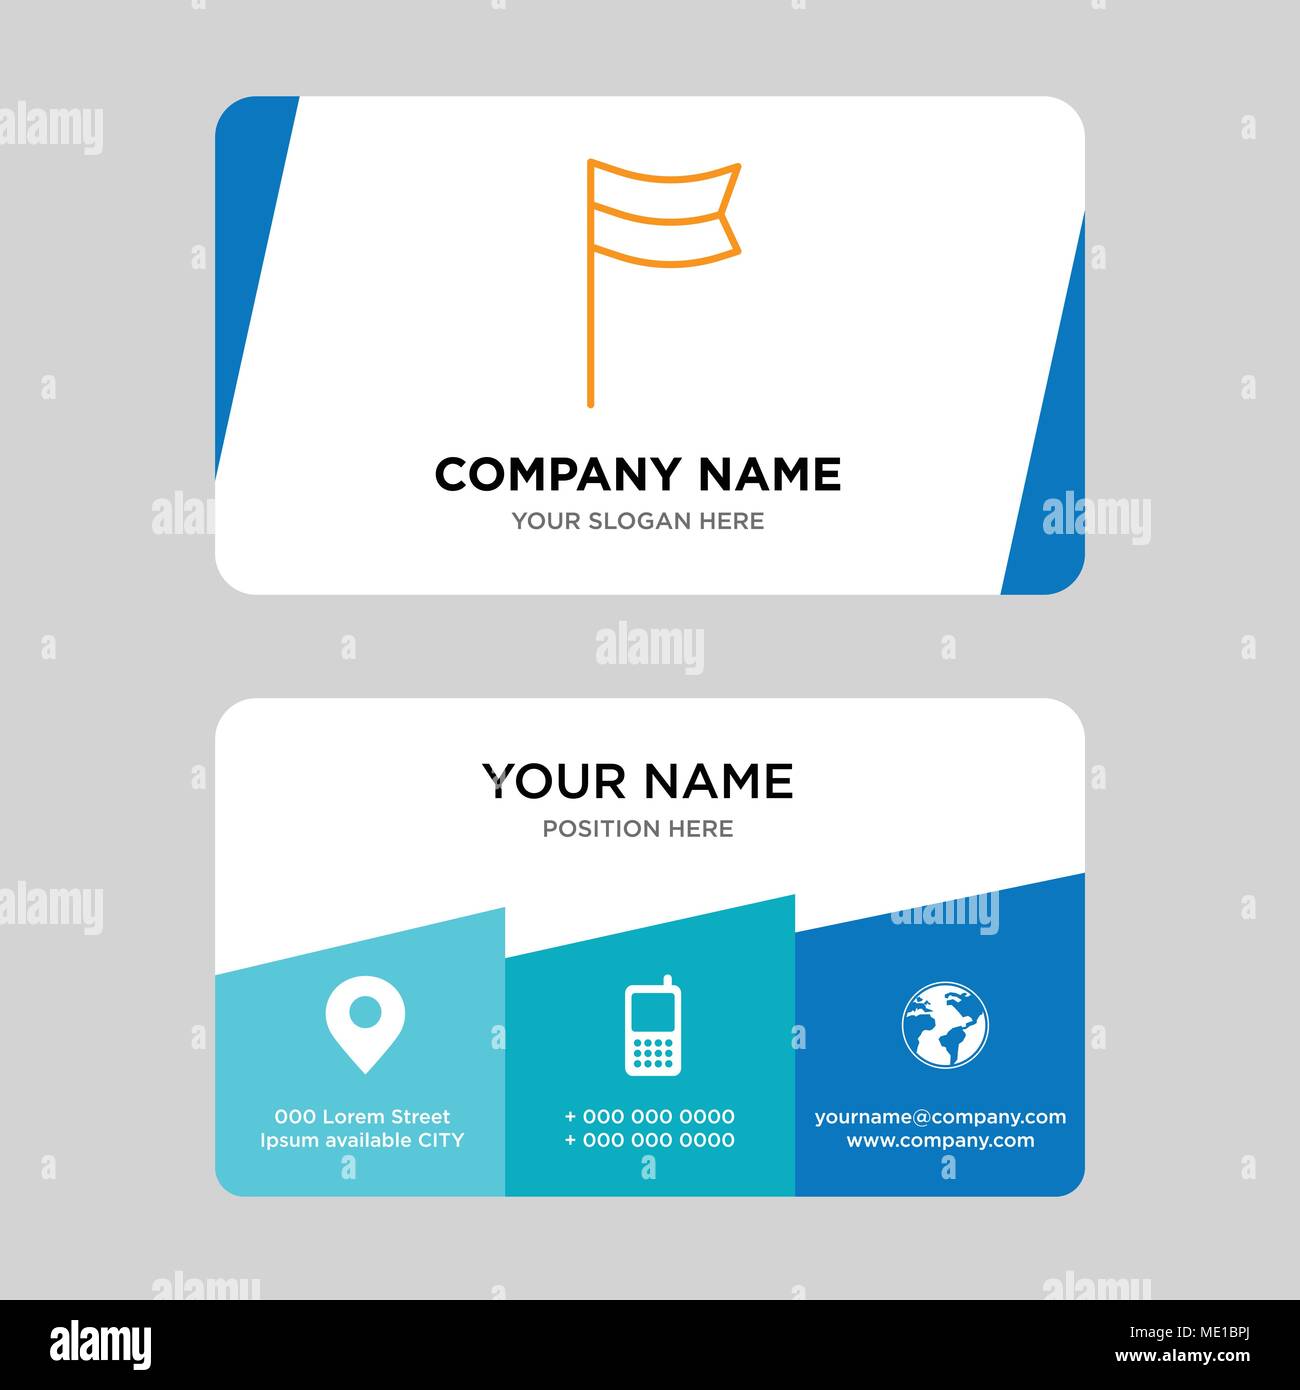 Netherlands id card templates